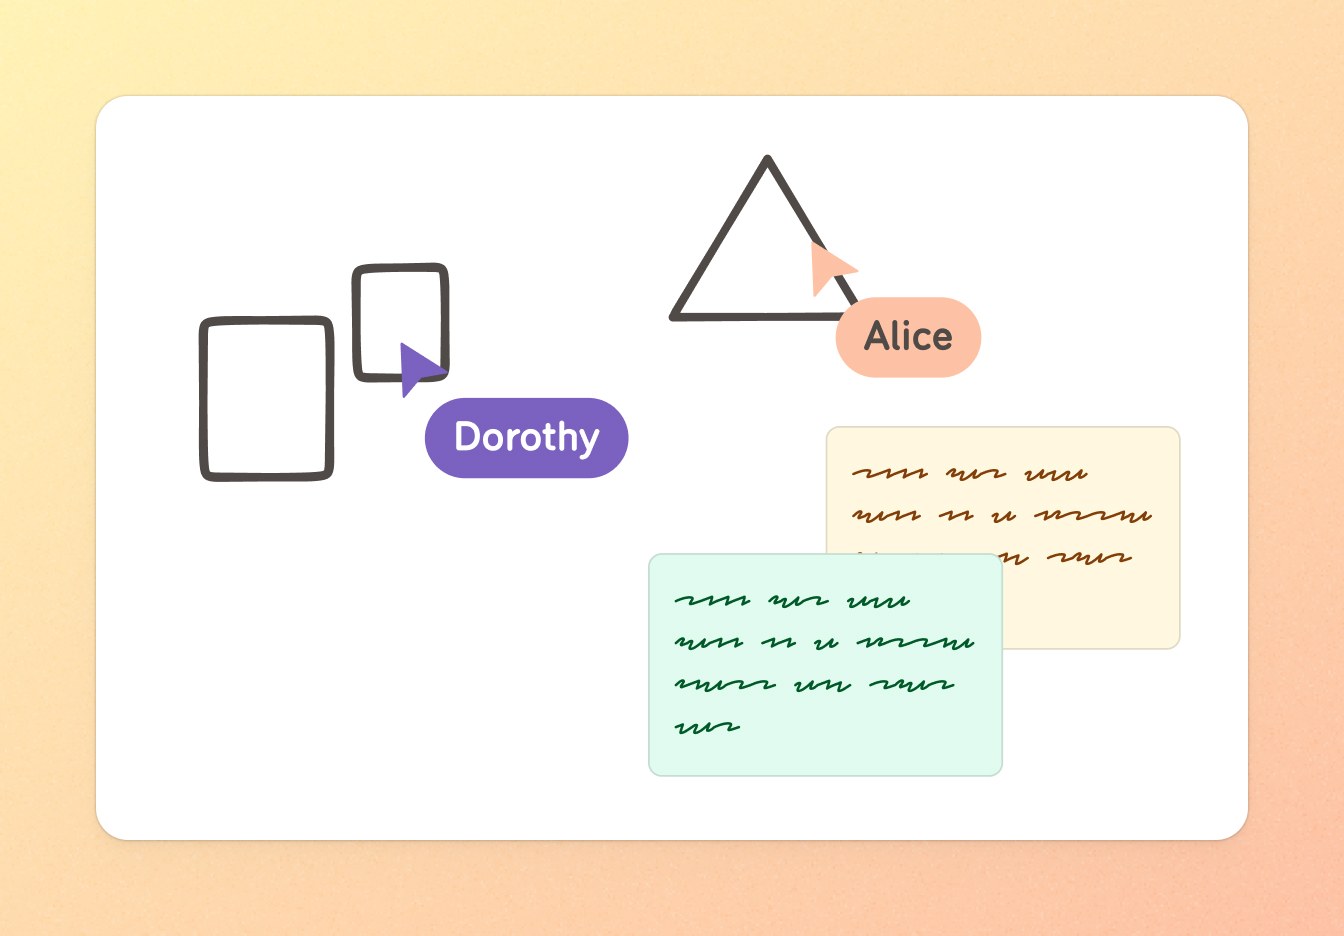 A whiteboard with some shapes and some sticky notes, and 2 mouse cursors: one marked 'Dorothy' and one marked 'Alice'.